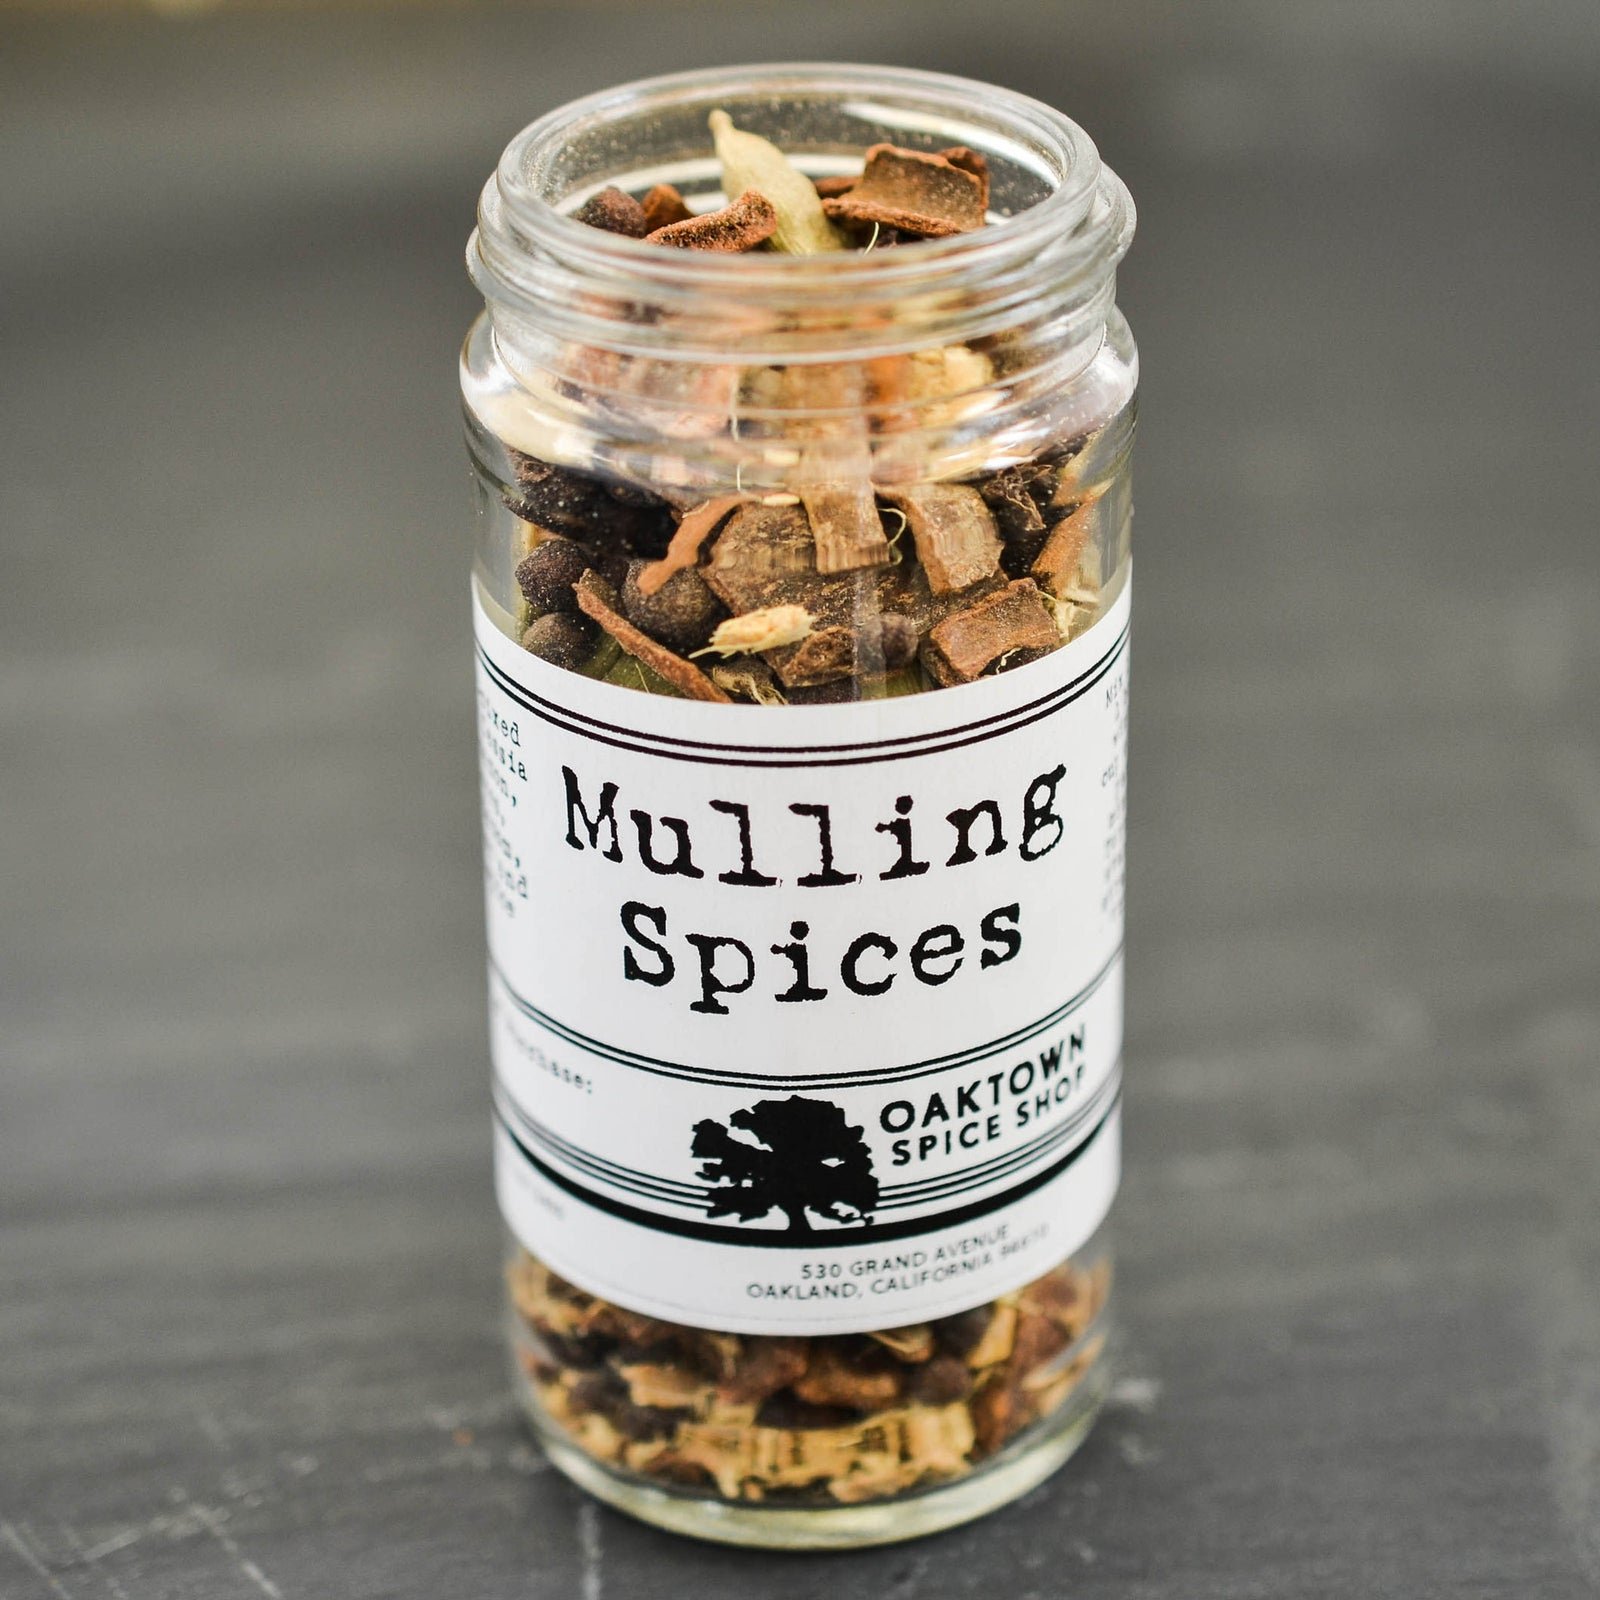 02                                    Mulling Spices - Nothing compliments the crisp autumn air like the aroma of a warm, bubbling pot of mulling spices. Hand-blended in Oakland, Oaktown Spice Shop’s rich mix of allspice, ginger, cardamom, cinnamon and cloves will keep you warm inside and out. SHOP NOW >” loading=”lazy”></noscript><br />
<img decoding=